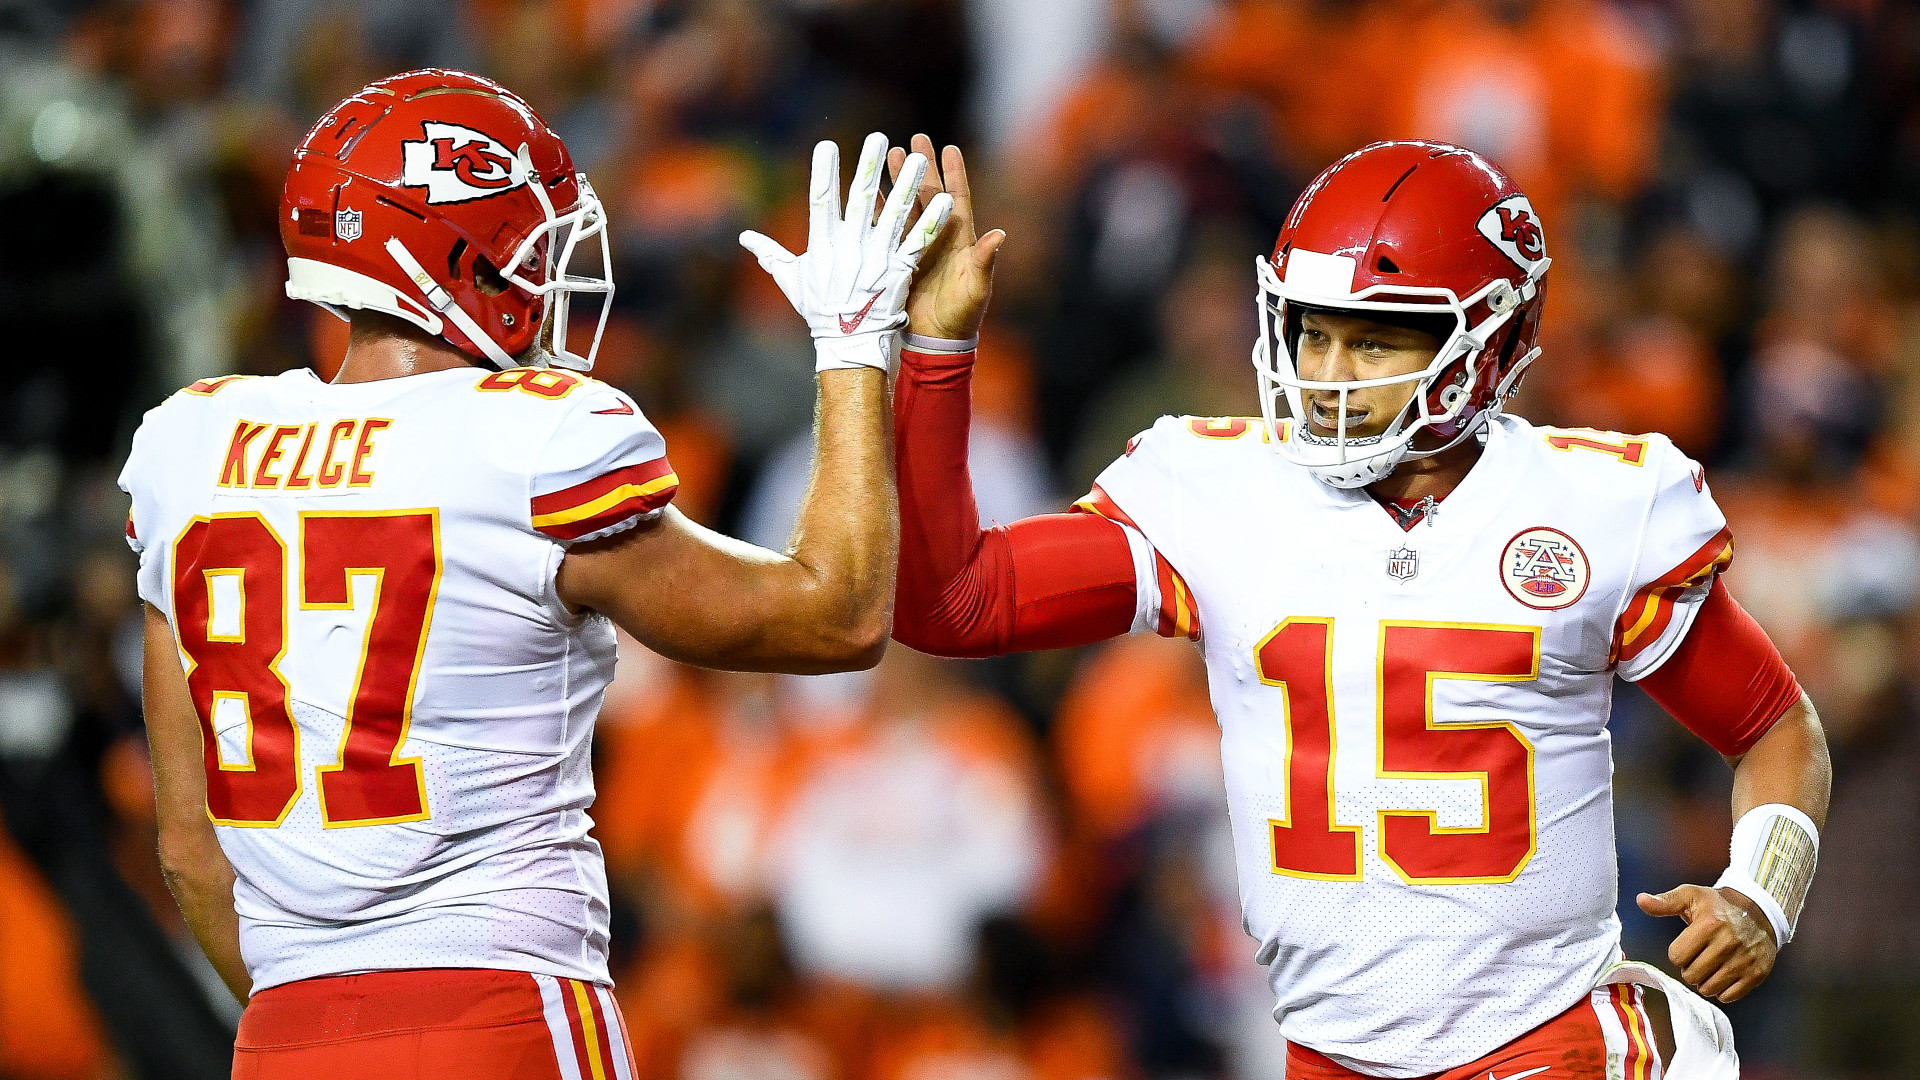 Broncos Vs. Chiefs: Score, Result, Highlights From 'Monday Night